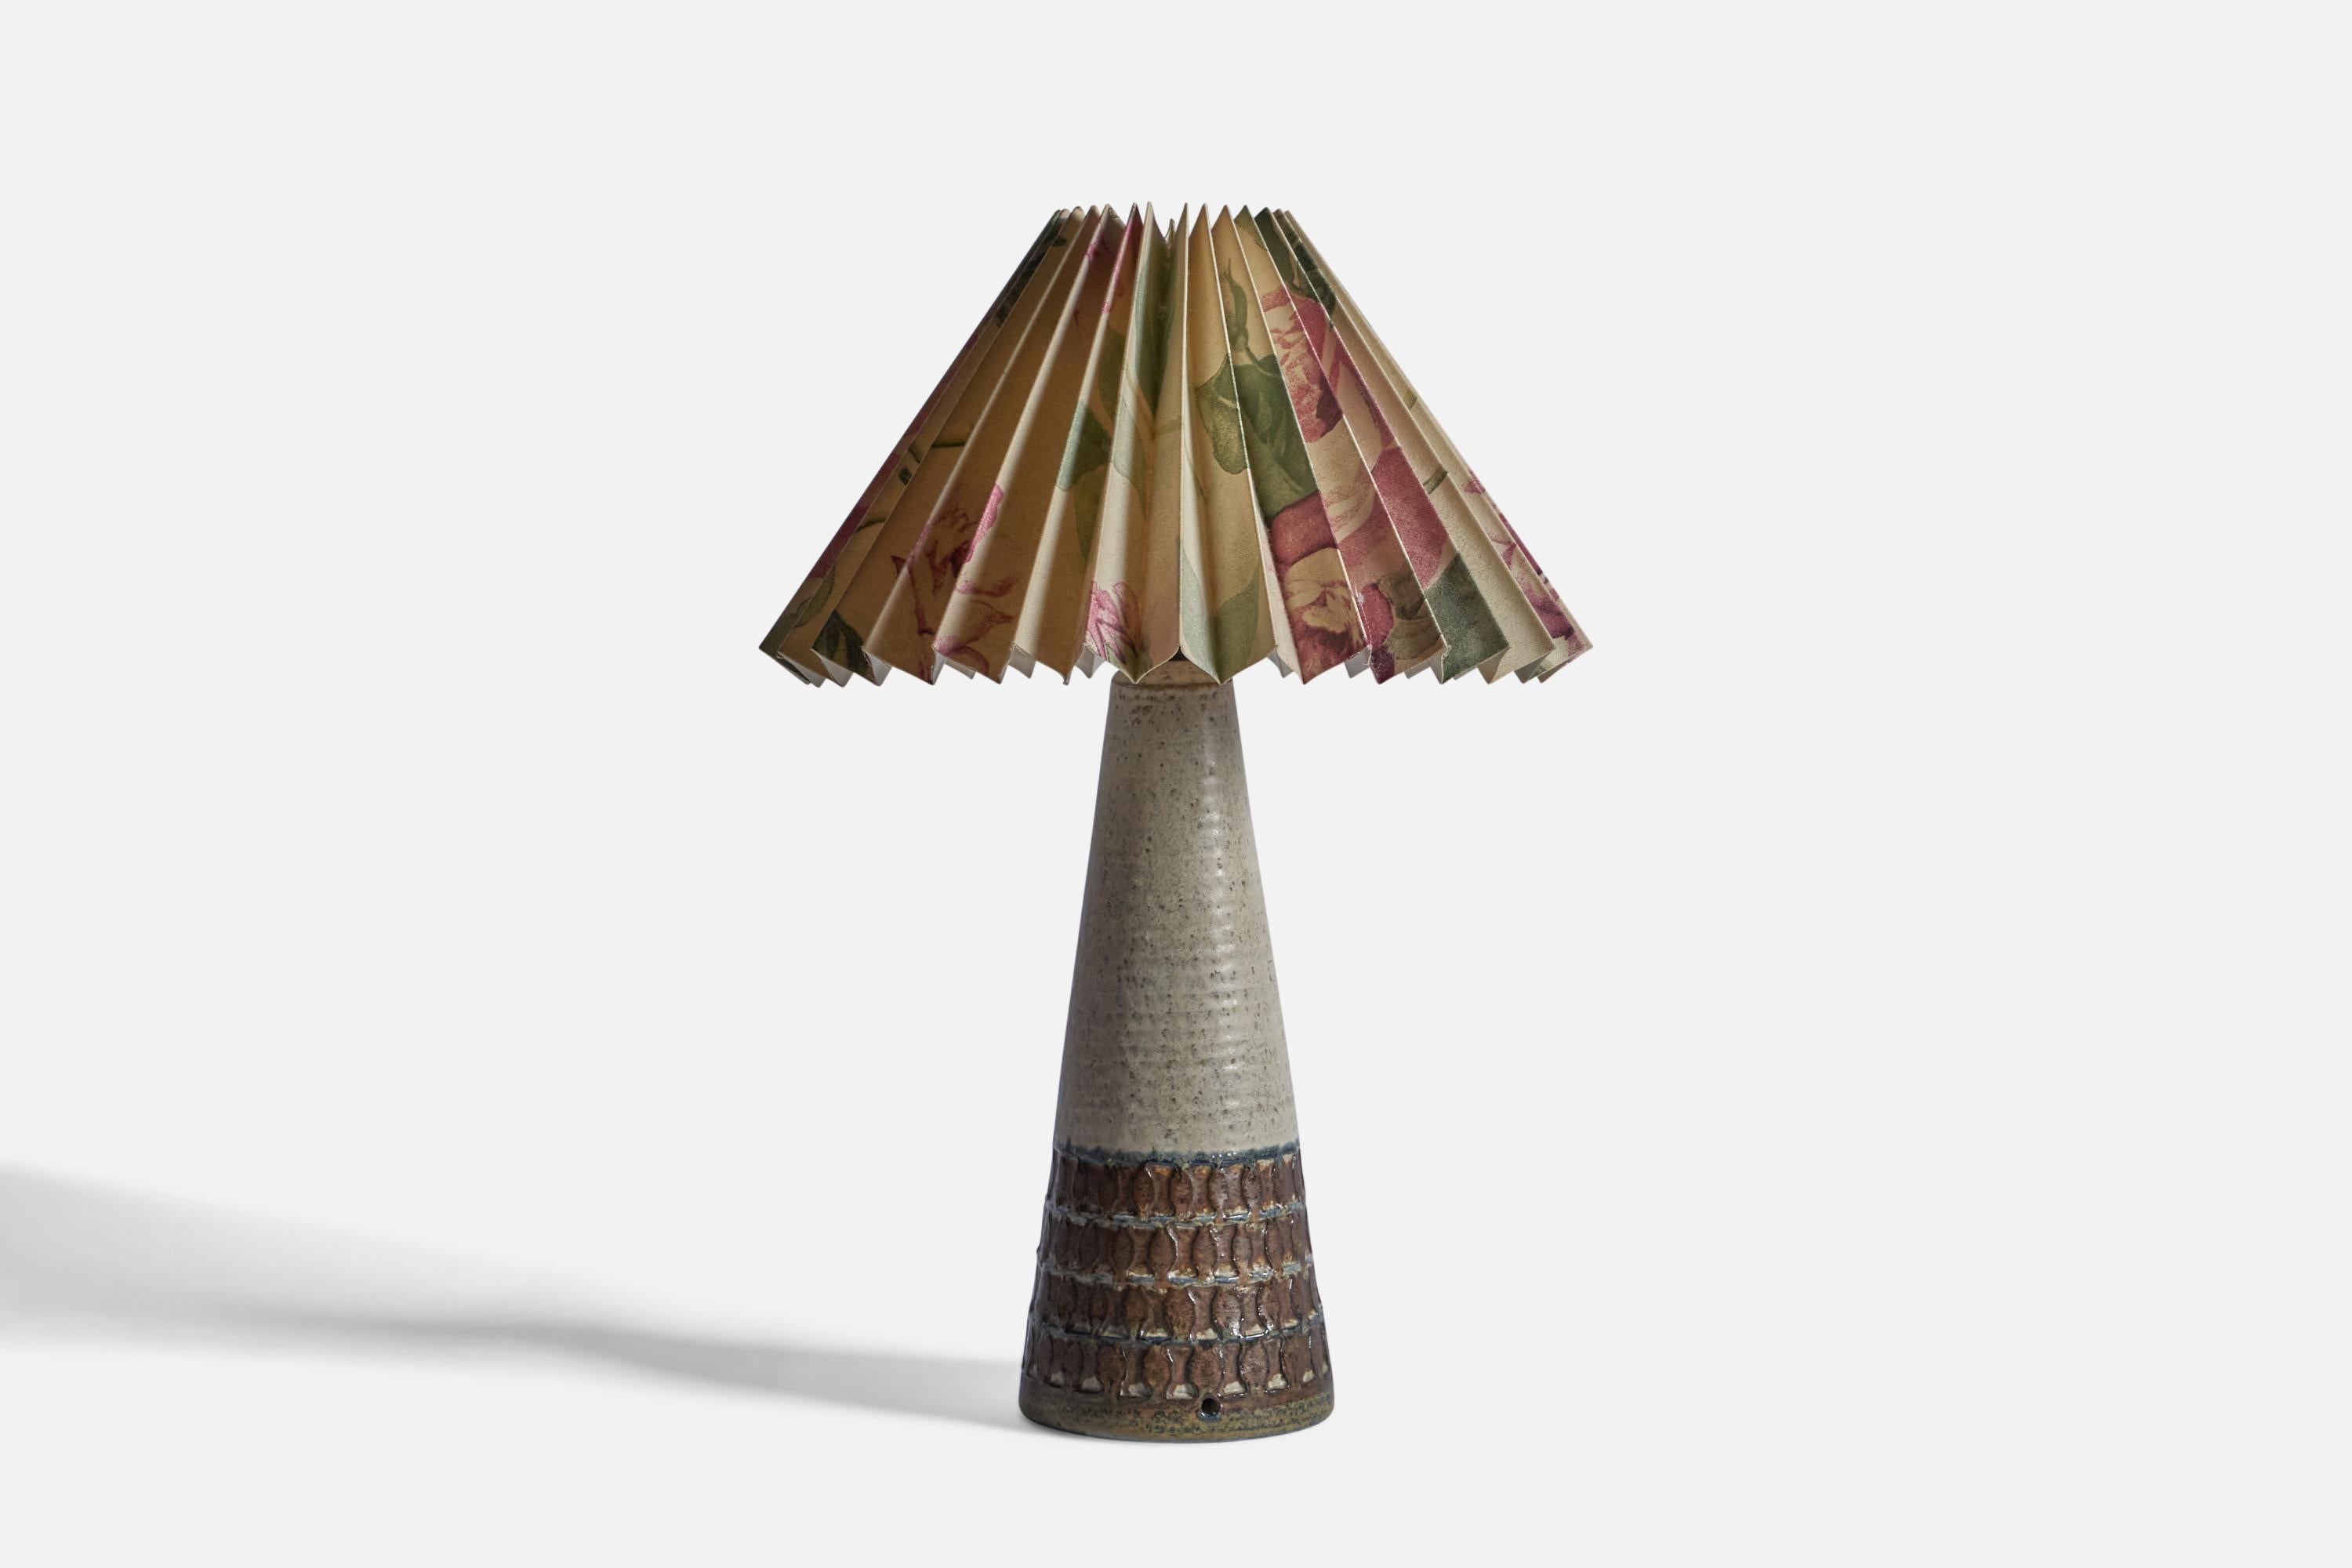 A white and brown-glazed stoneware and printed floral paper table lamp, designed and produced by Søholm, Bornholm, Denmark, c. 1960s.

Sold with Lampshade

Dimensions stated are of Table Lamp with Lampshade.